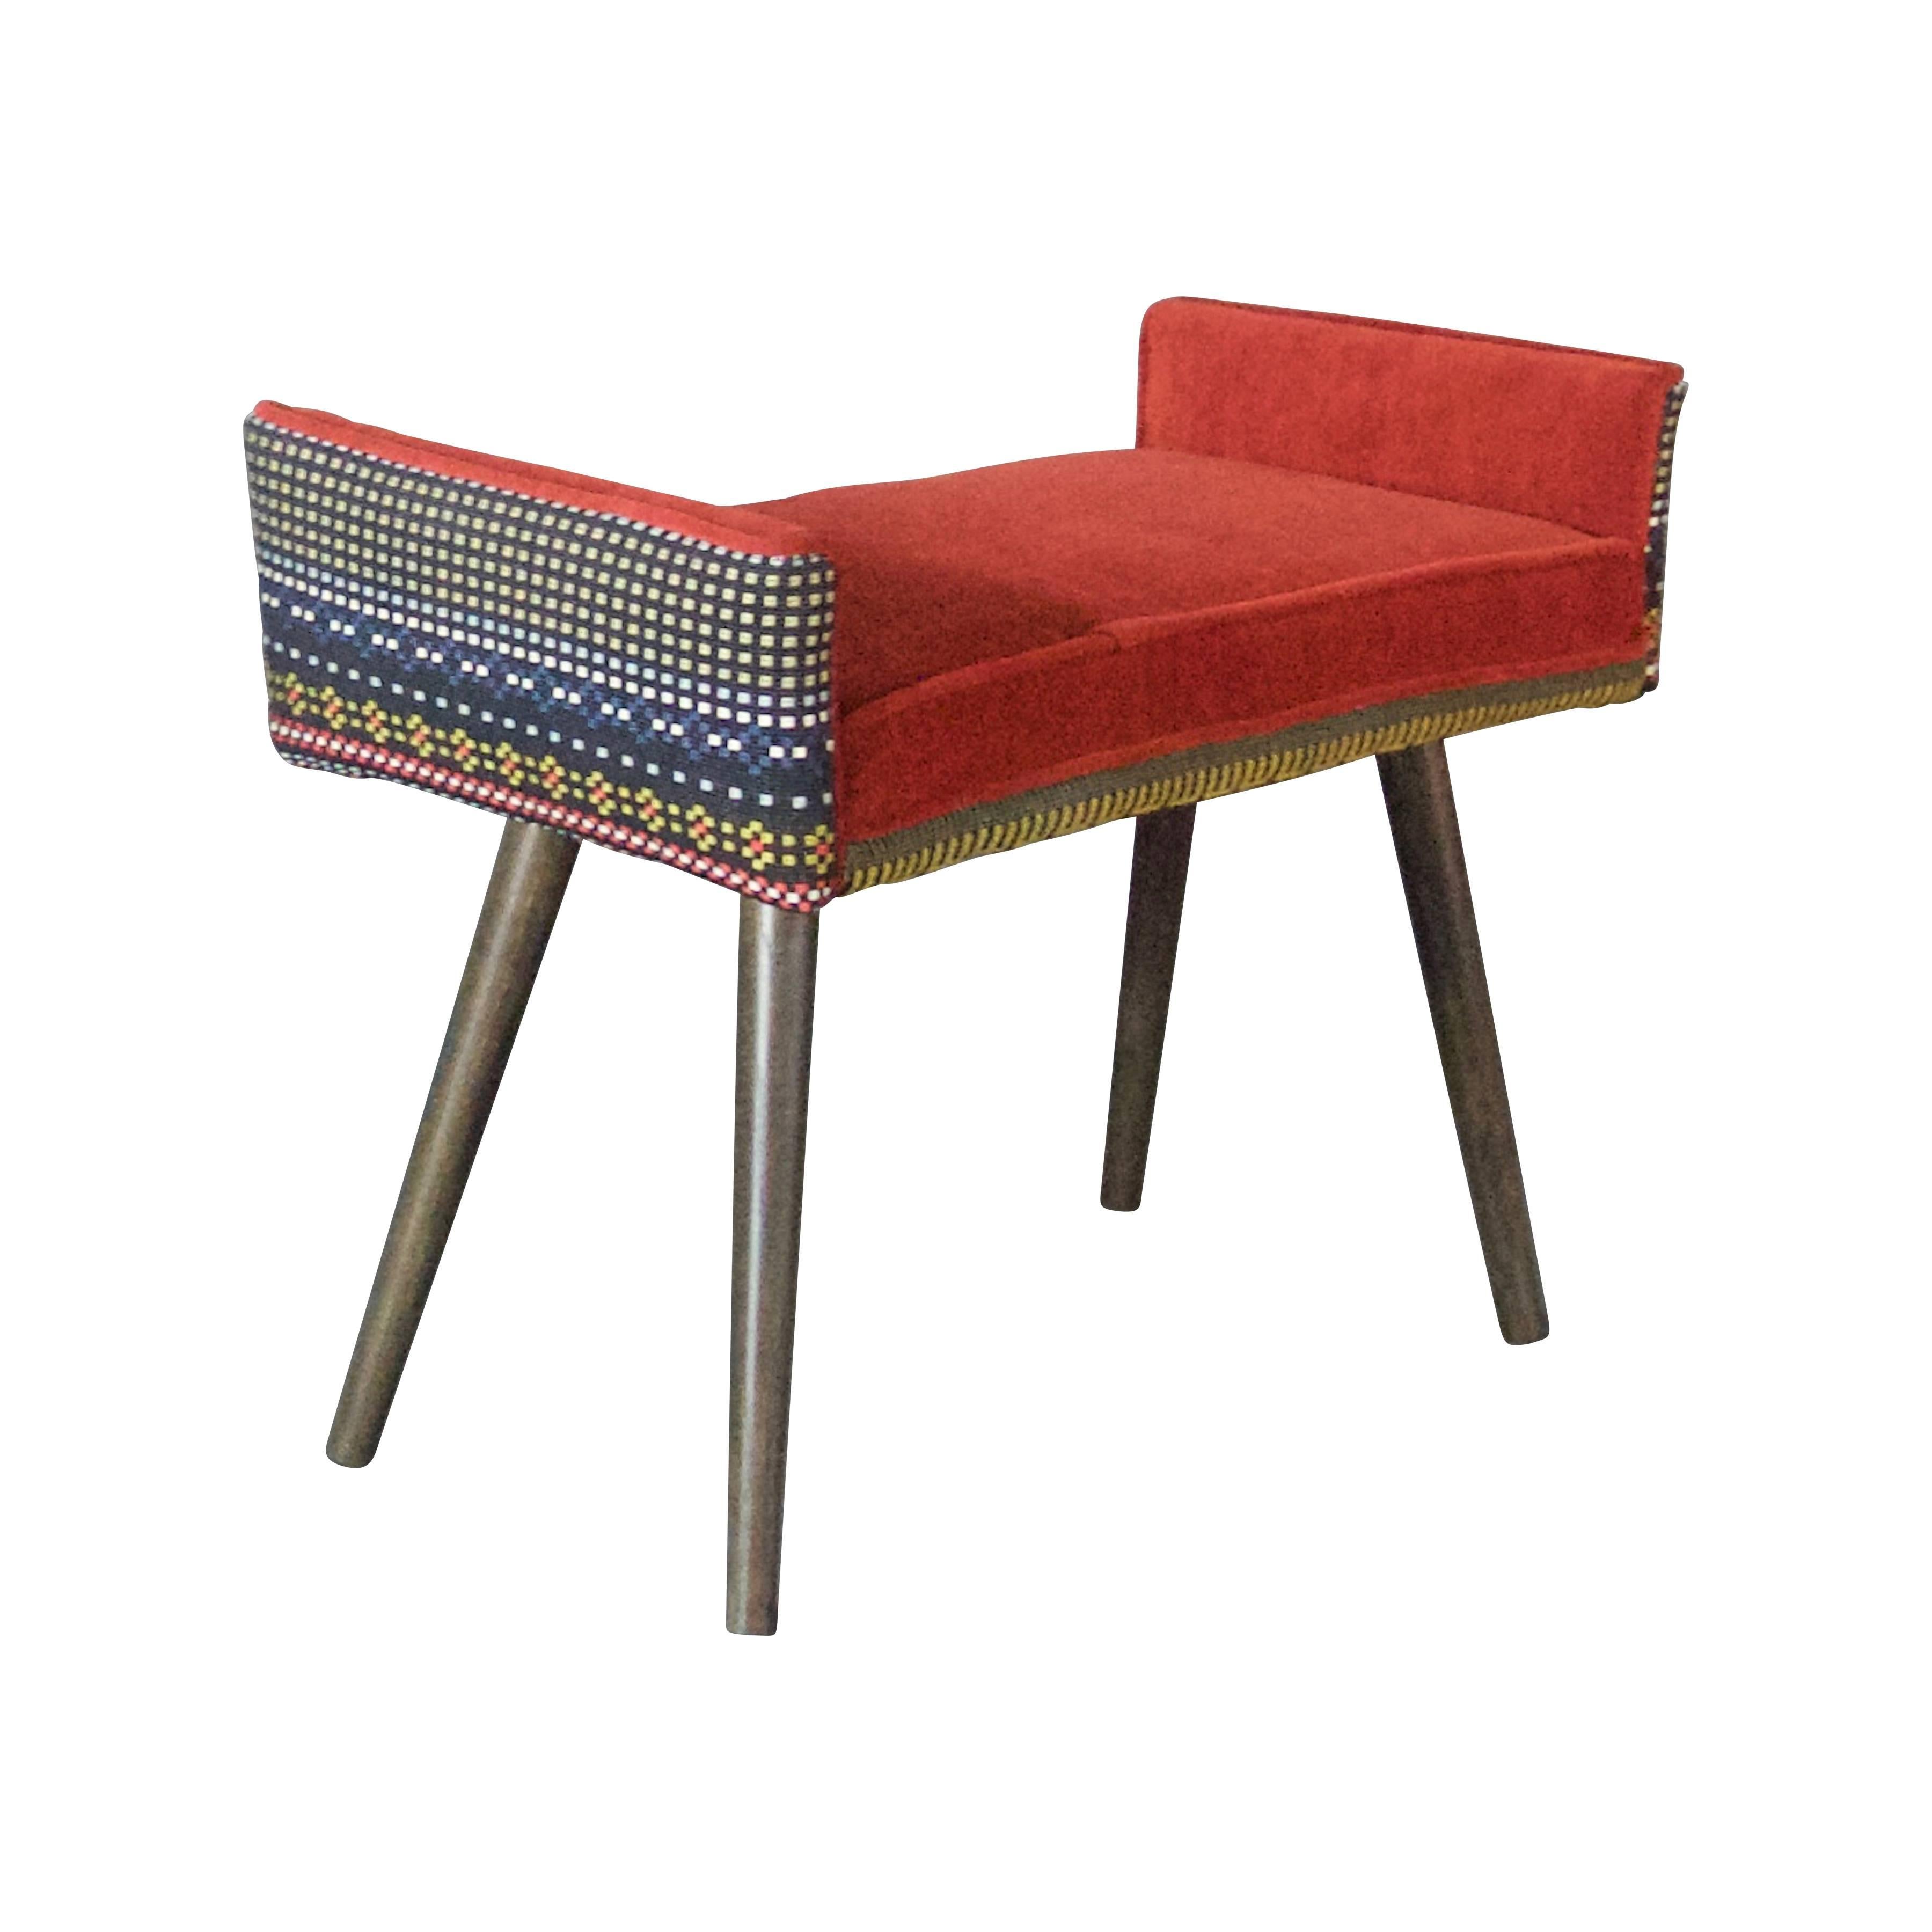 Modern Studio Series:  Backless Vanity Size Stool in Folklorica with Flame Red Seat For Sale